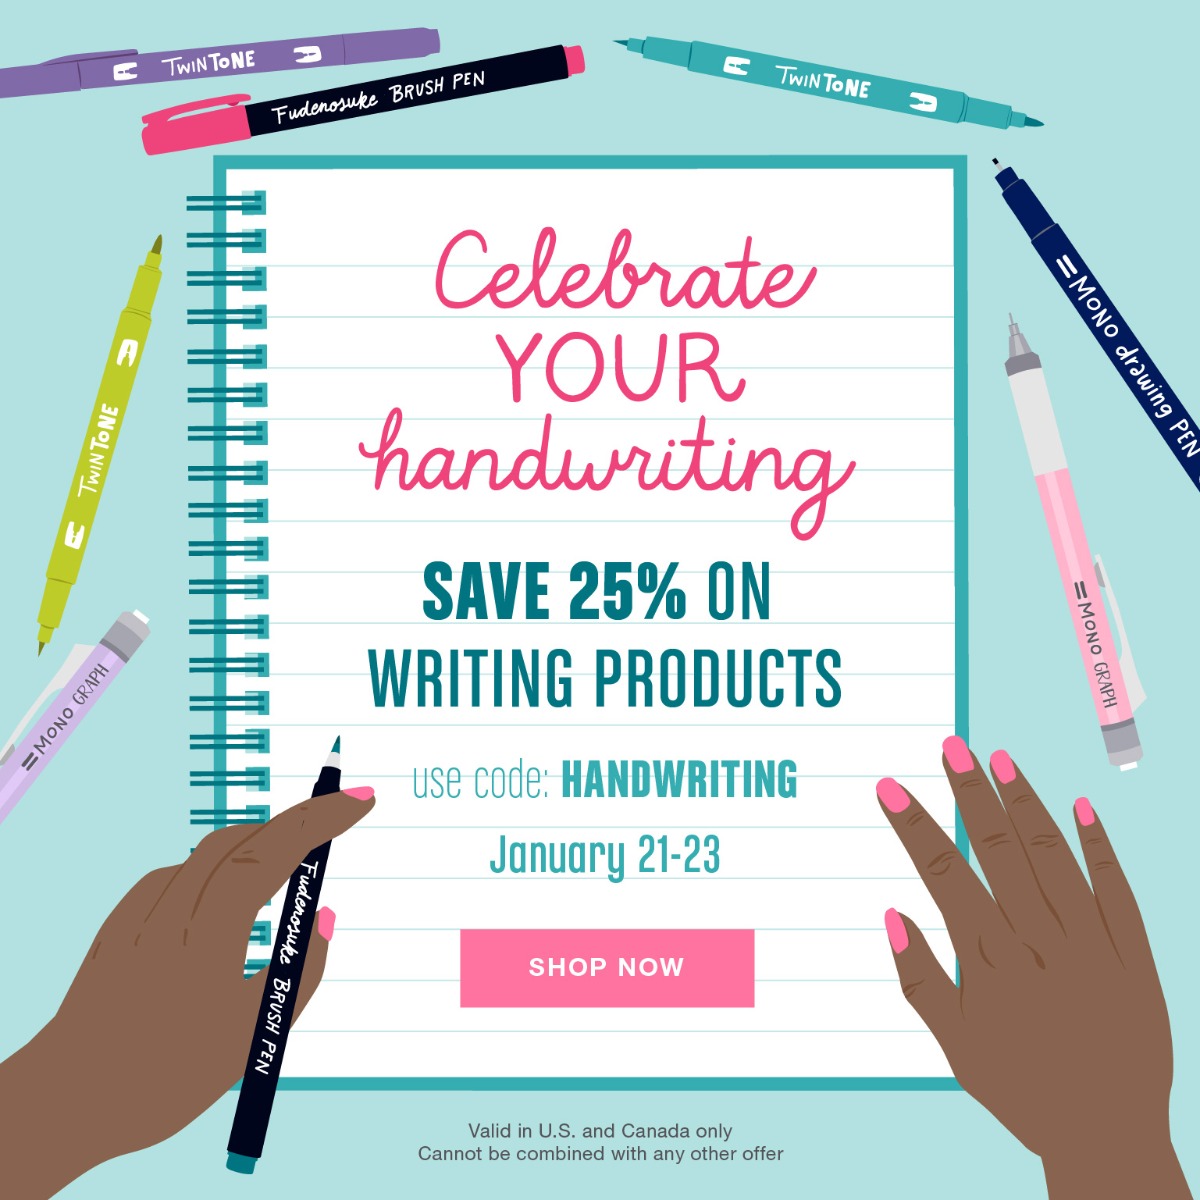 Celebrate your handwriting with 25% off Tombow writing products with code 